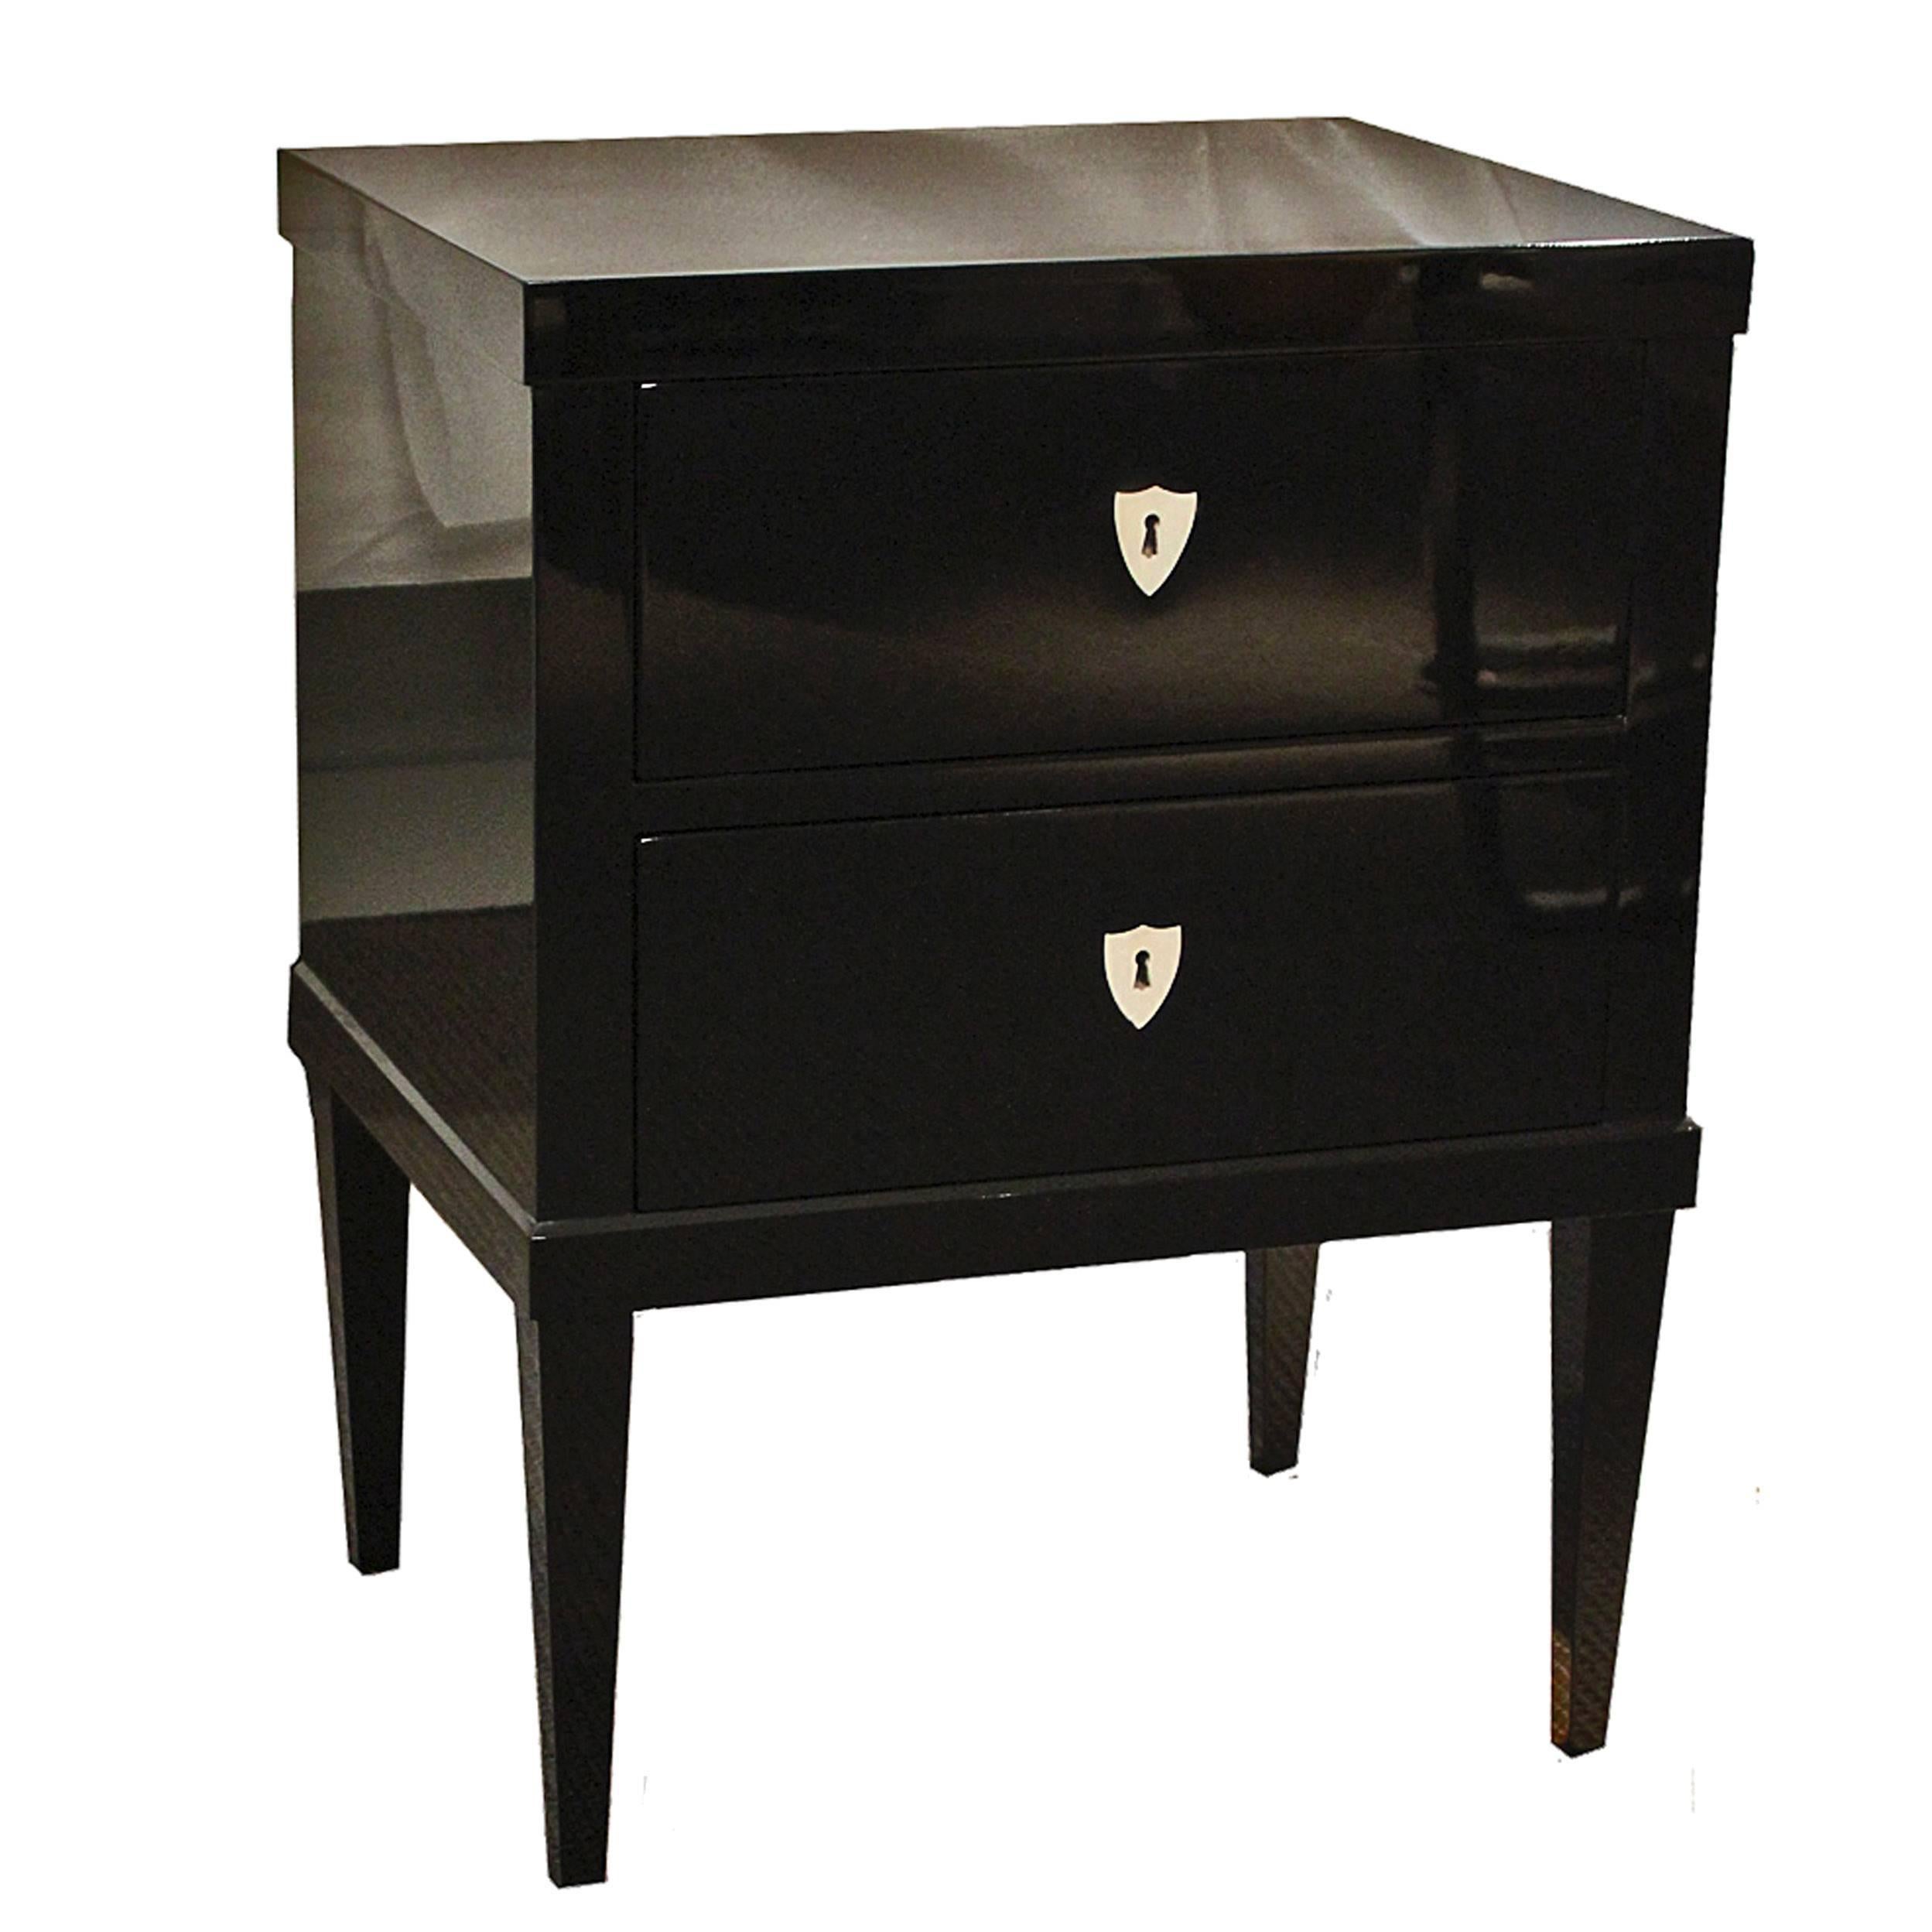 BIEDERMEIER BEDSIDE CABINET

Black (RAL 9004) piano lacquered bedside cabinet with wood lined drawers, horn escutcheons and nickel key locks. Also available in white (RAL 9001) piano lacquered colour finish on request.

W50 x D40 x H70 cm 

Lead